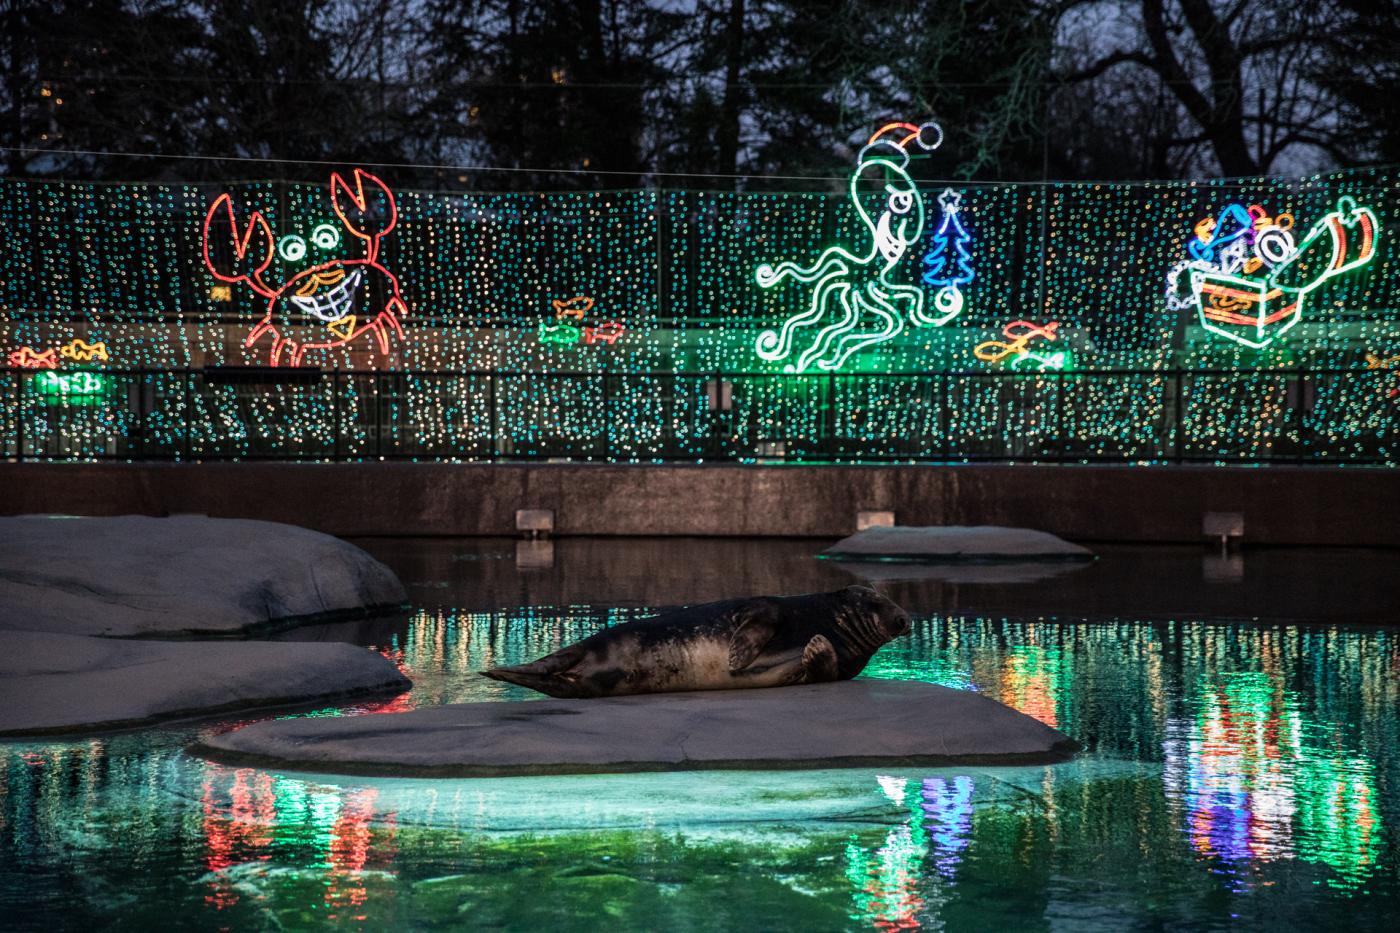 Lincoln Park Zoo Lights